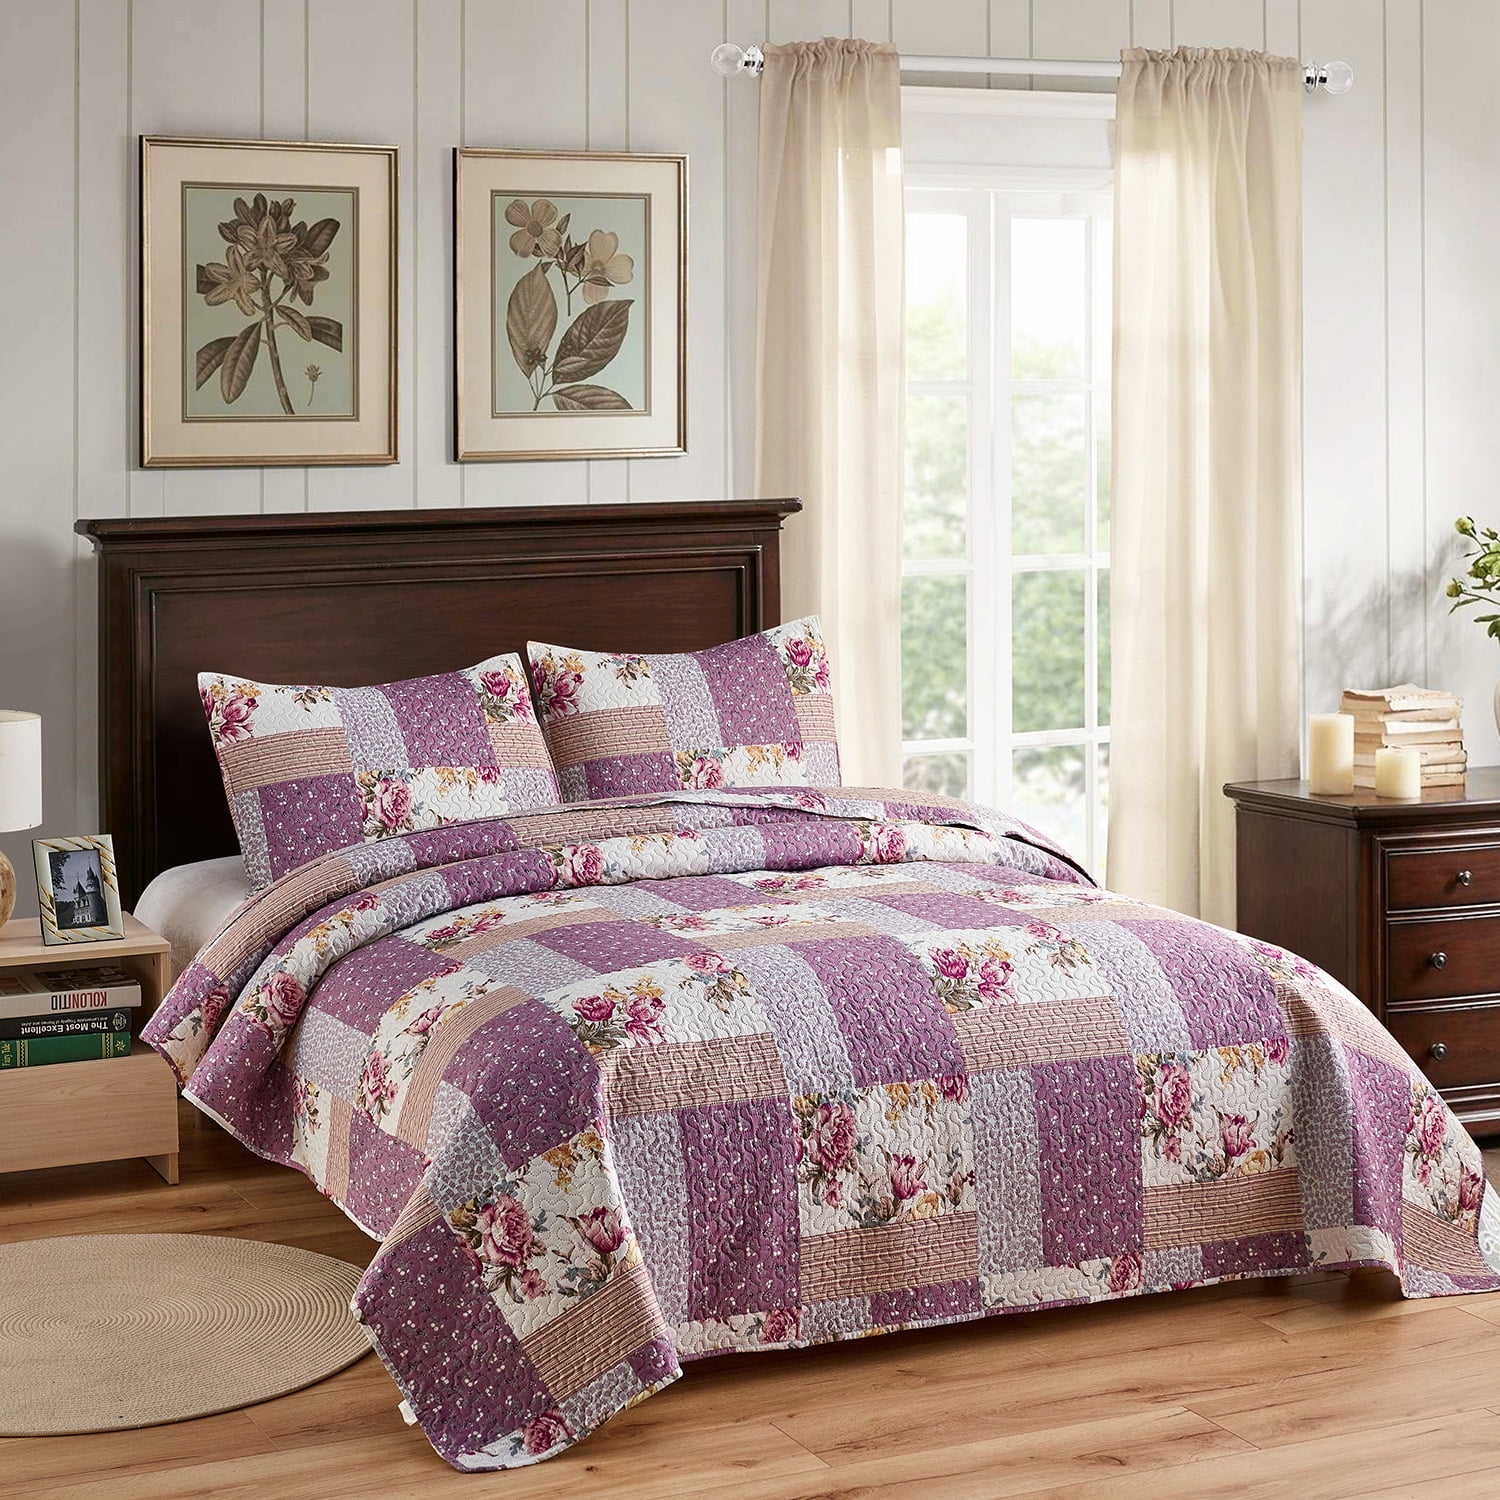 Quilt 3 Piece Reversible Bedspread Coverlet Lilac Set Soft Twin Queen King Gift 